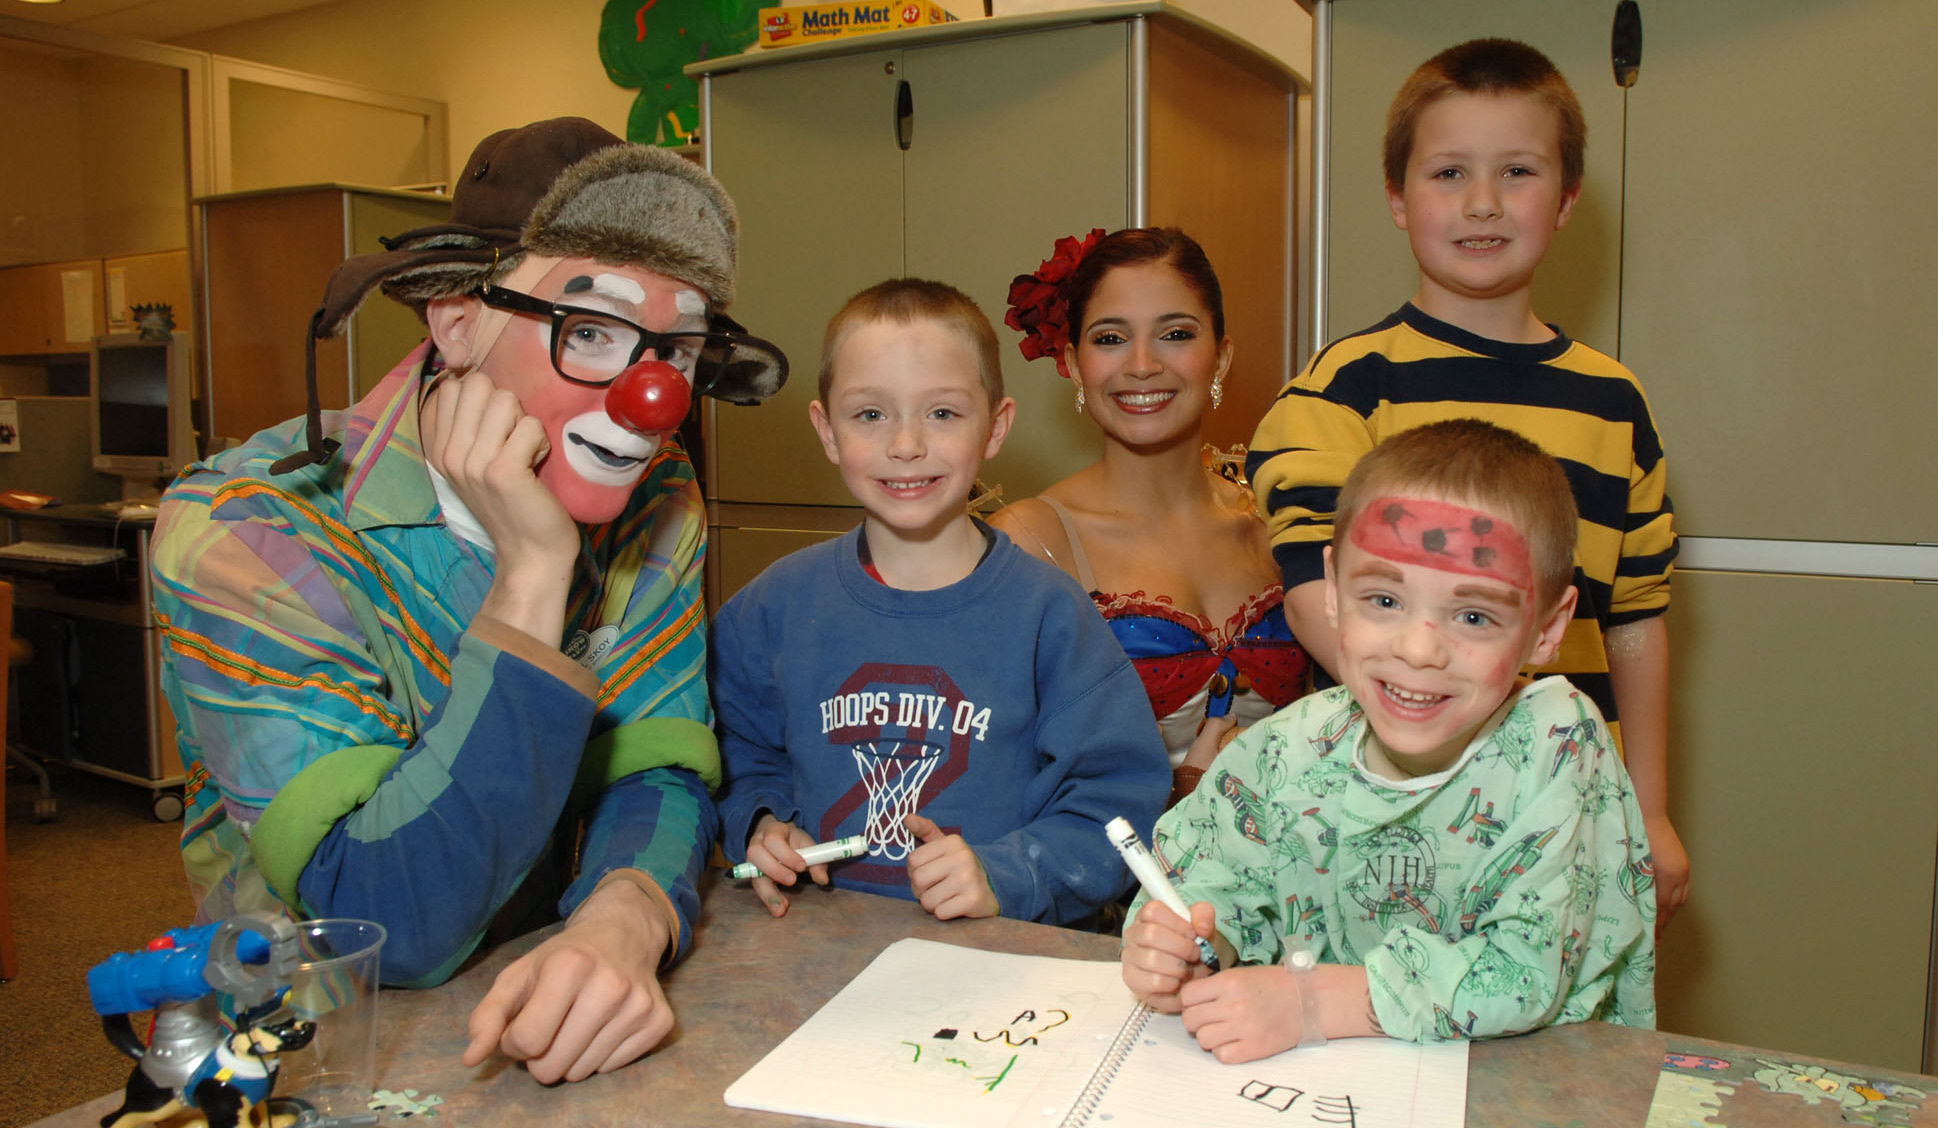 From left, clown Skoy; Joshua Jeffes; dancer Figuereido; Bennett Hume; and Jarrod Jeffes (patient with face paint) share a look at the kids’ artwork.